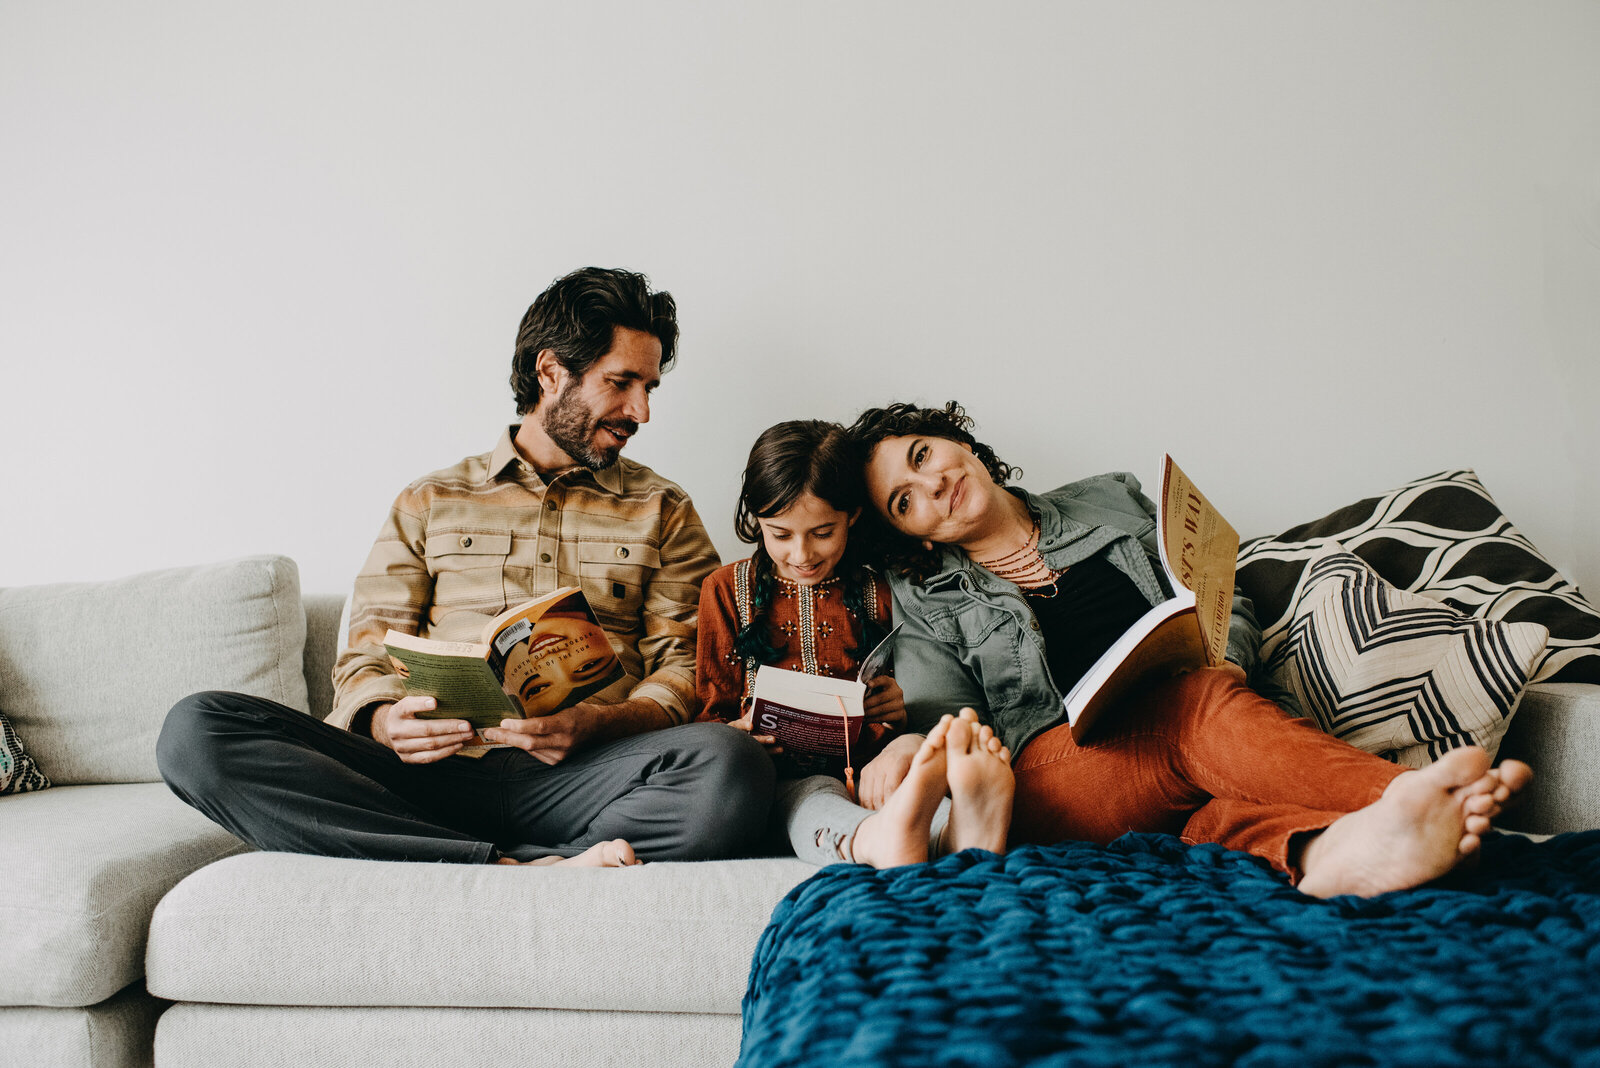 San Francisco family reads together on couch at home lifestyle portrait